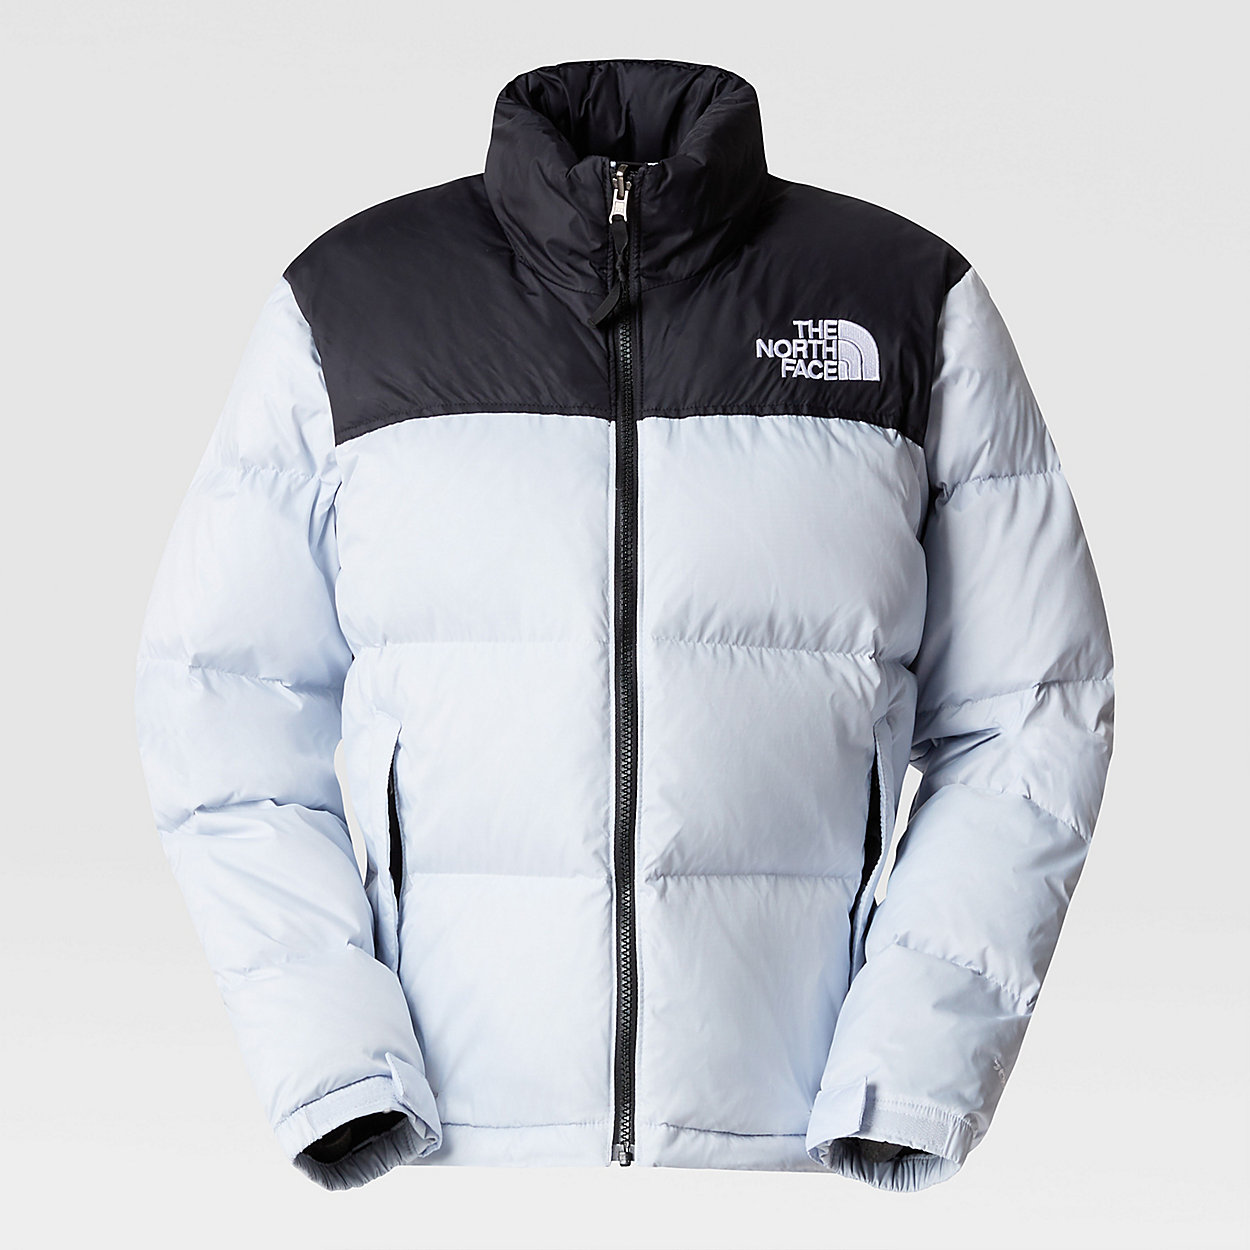 Unlock Wilderness' choice in the Mountain Warehouse Vs North Face comparison, the 1996 Retro Nuptse Jacket by The North Face